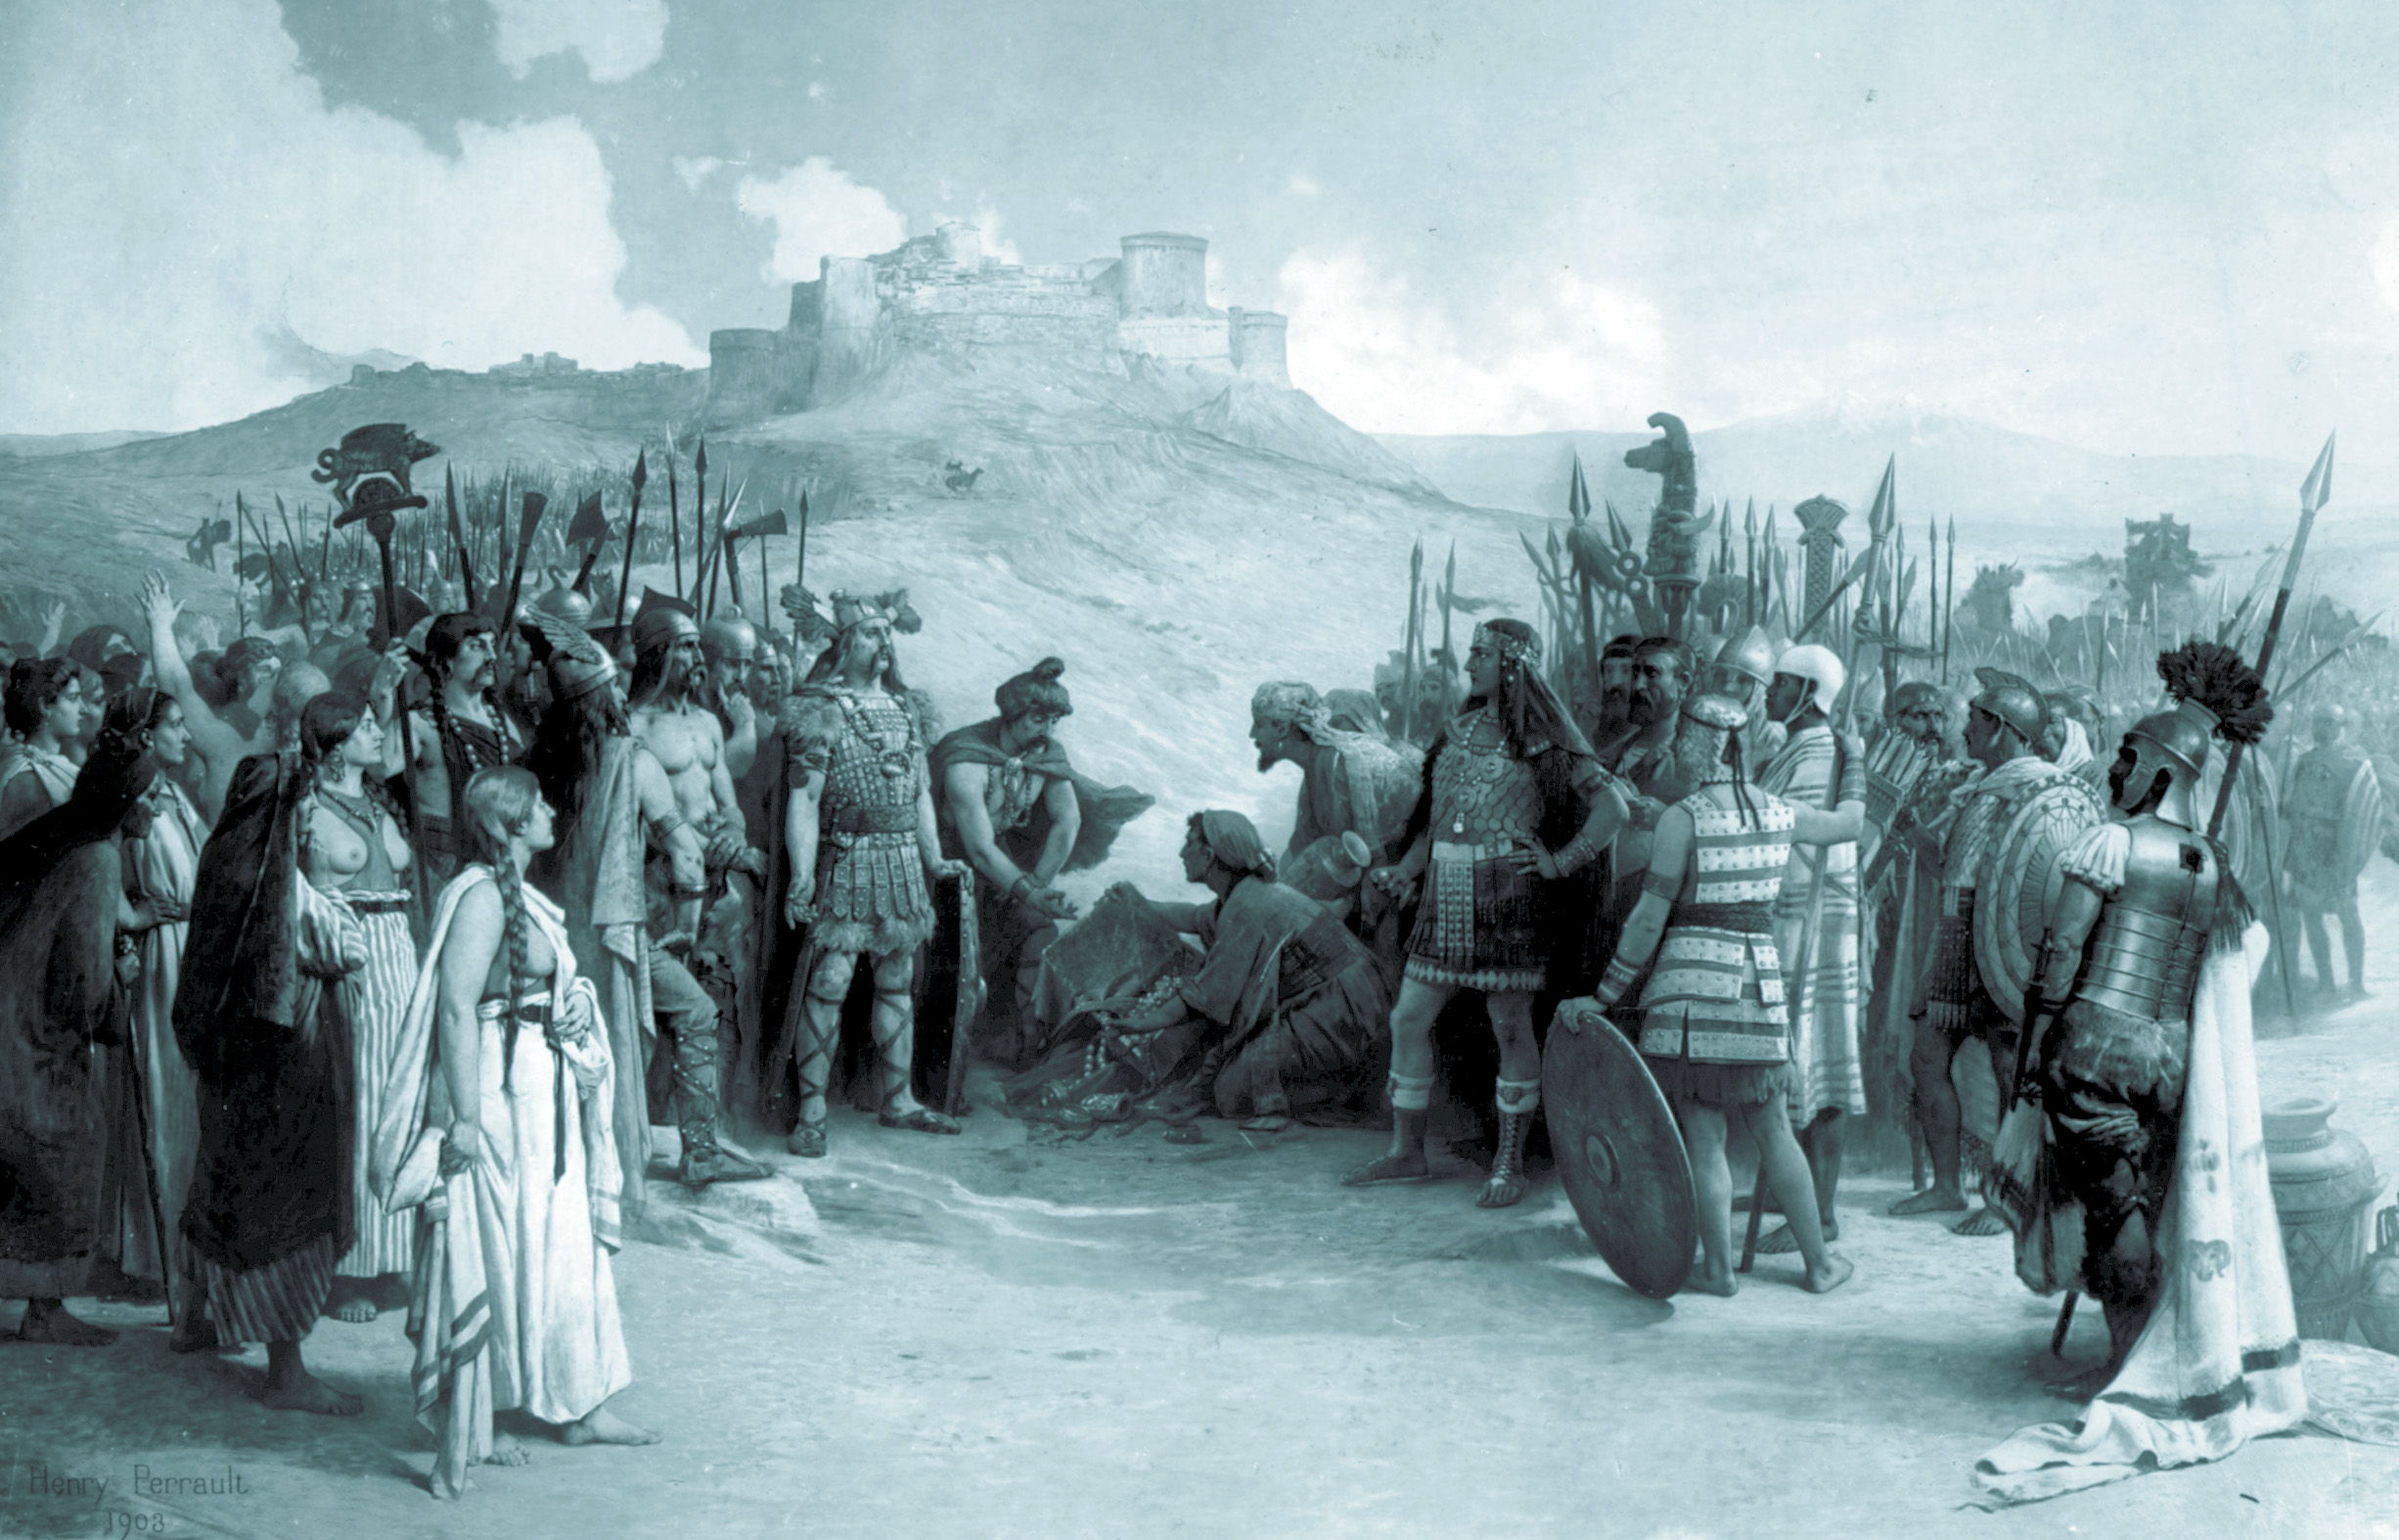 Hannibal negotiated with the Gauls as he marched his army along the Mediterranean toward Italy, as depicted in this 1903 painting. He wanted to gain allies as he traveled.